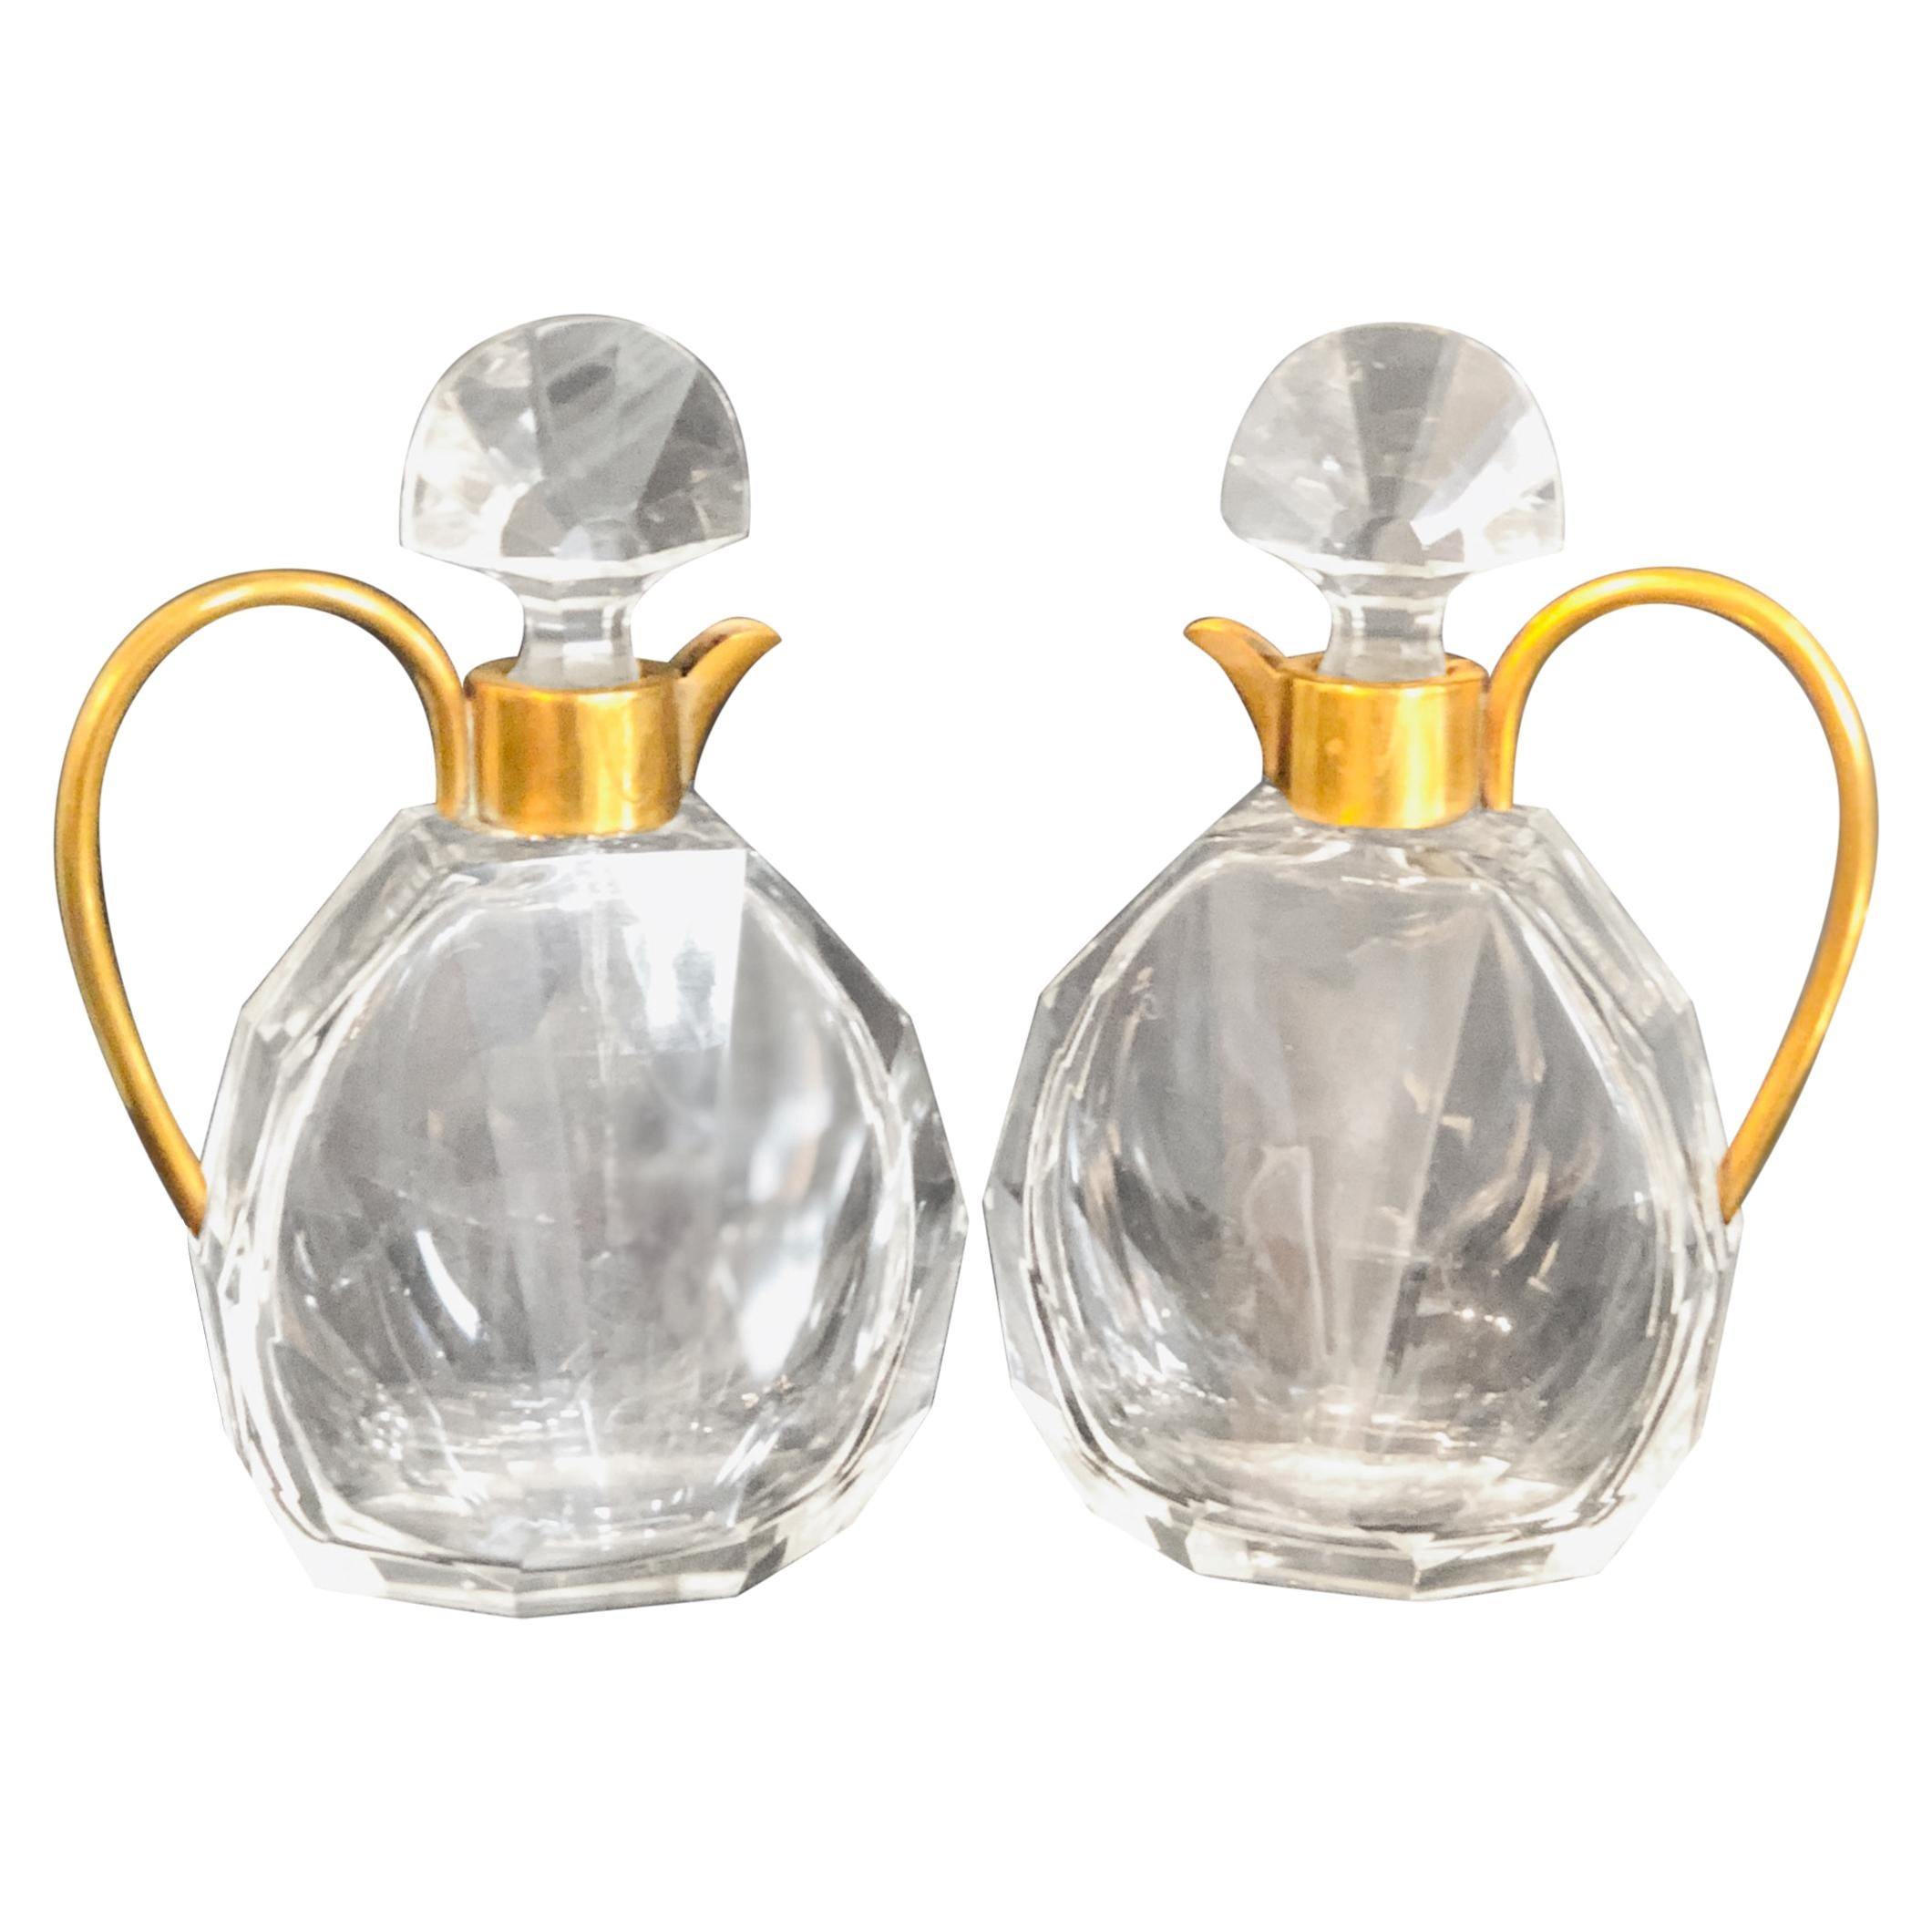 Pair of Art Deco Faceted Glass and Brass Petite Decanters